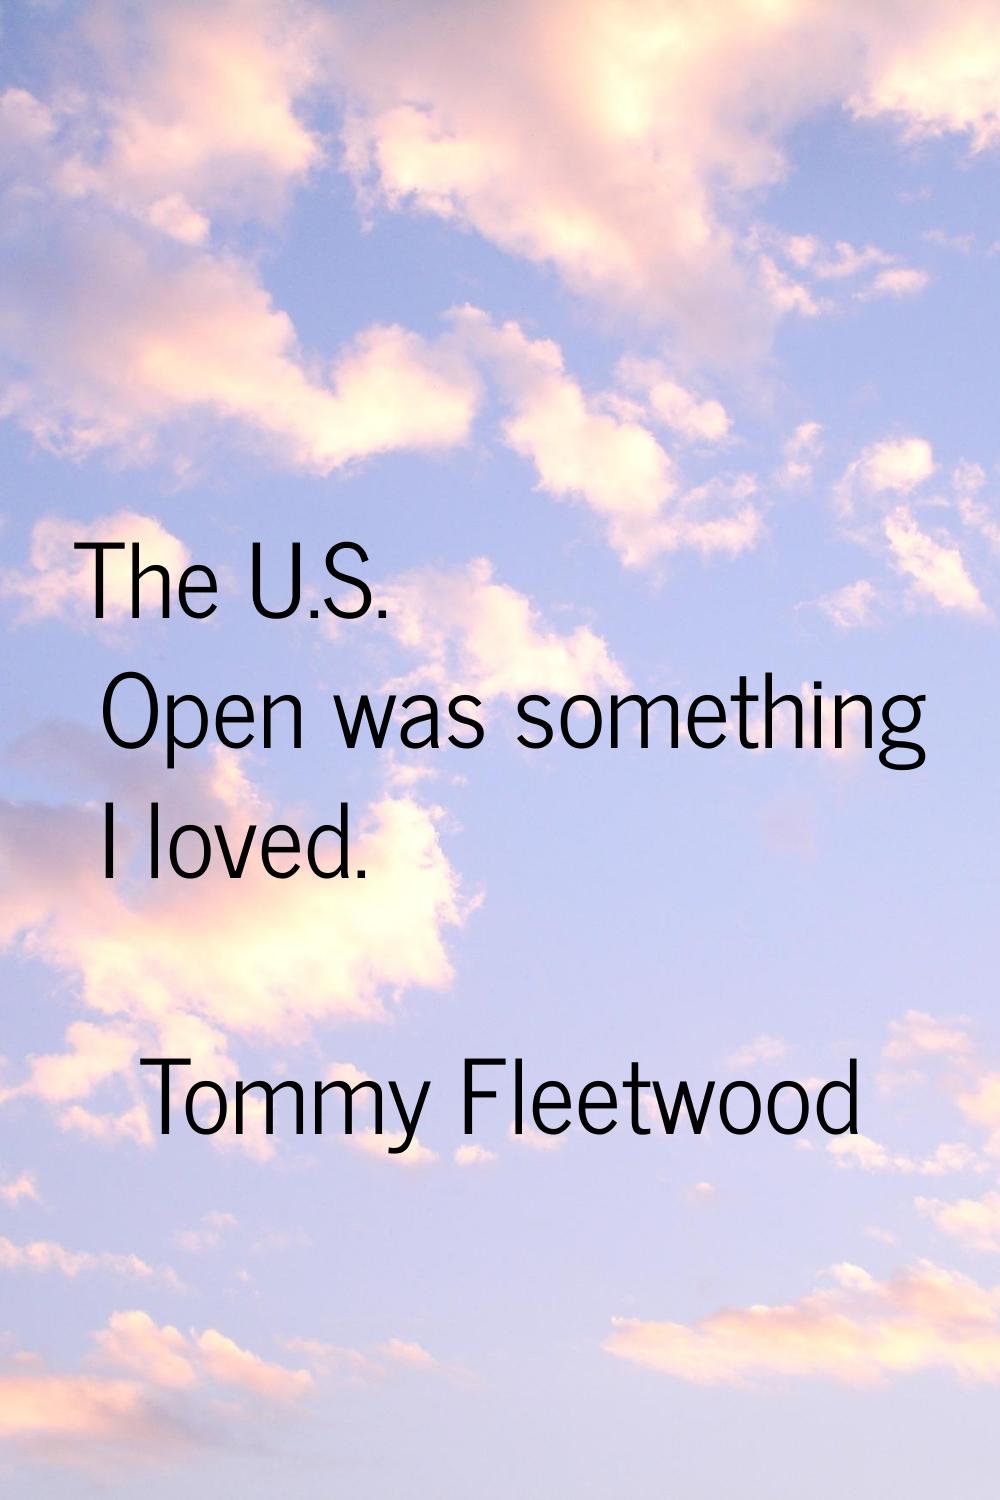 The U.S. Open was something I loved.